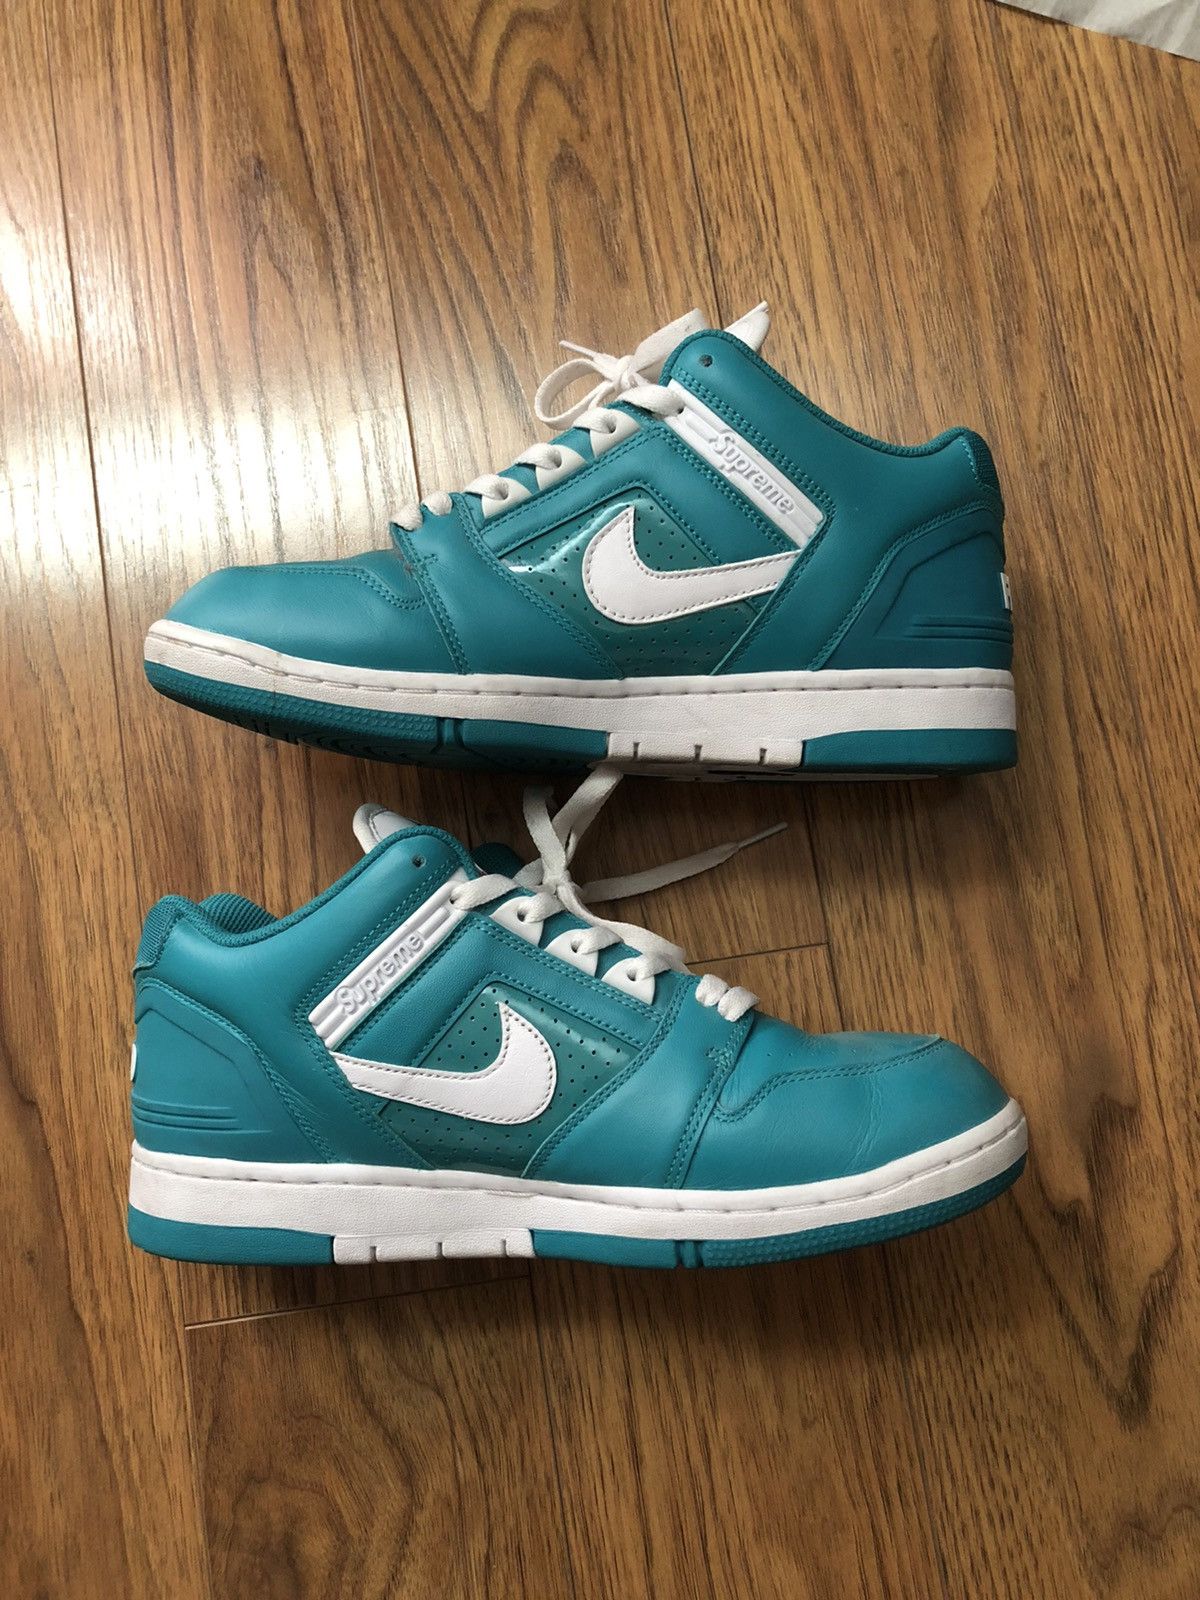 Supreme Supreme x Air Force 2 Low Teal 2017 Size US 9 / EU 42 - 2 Preview